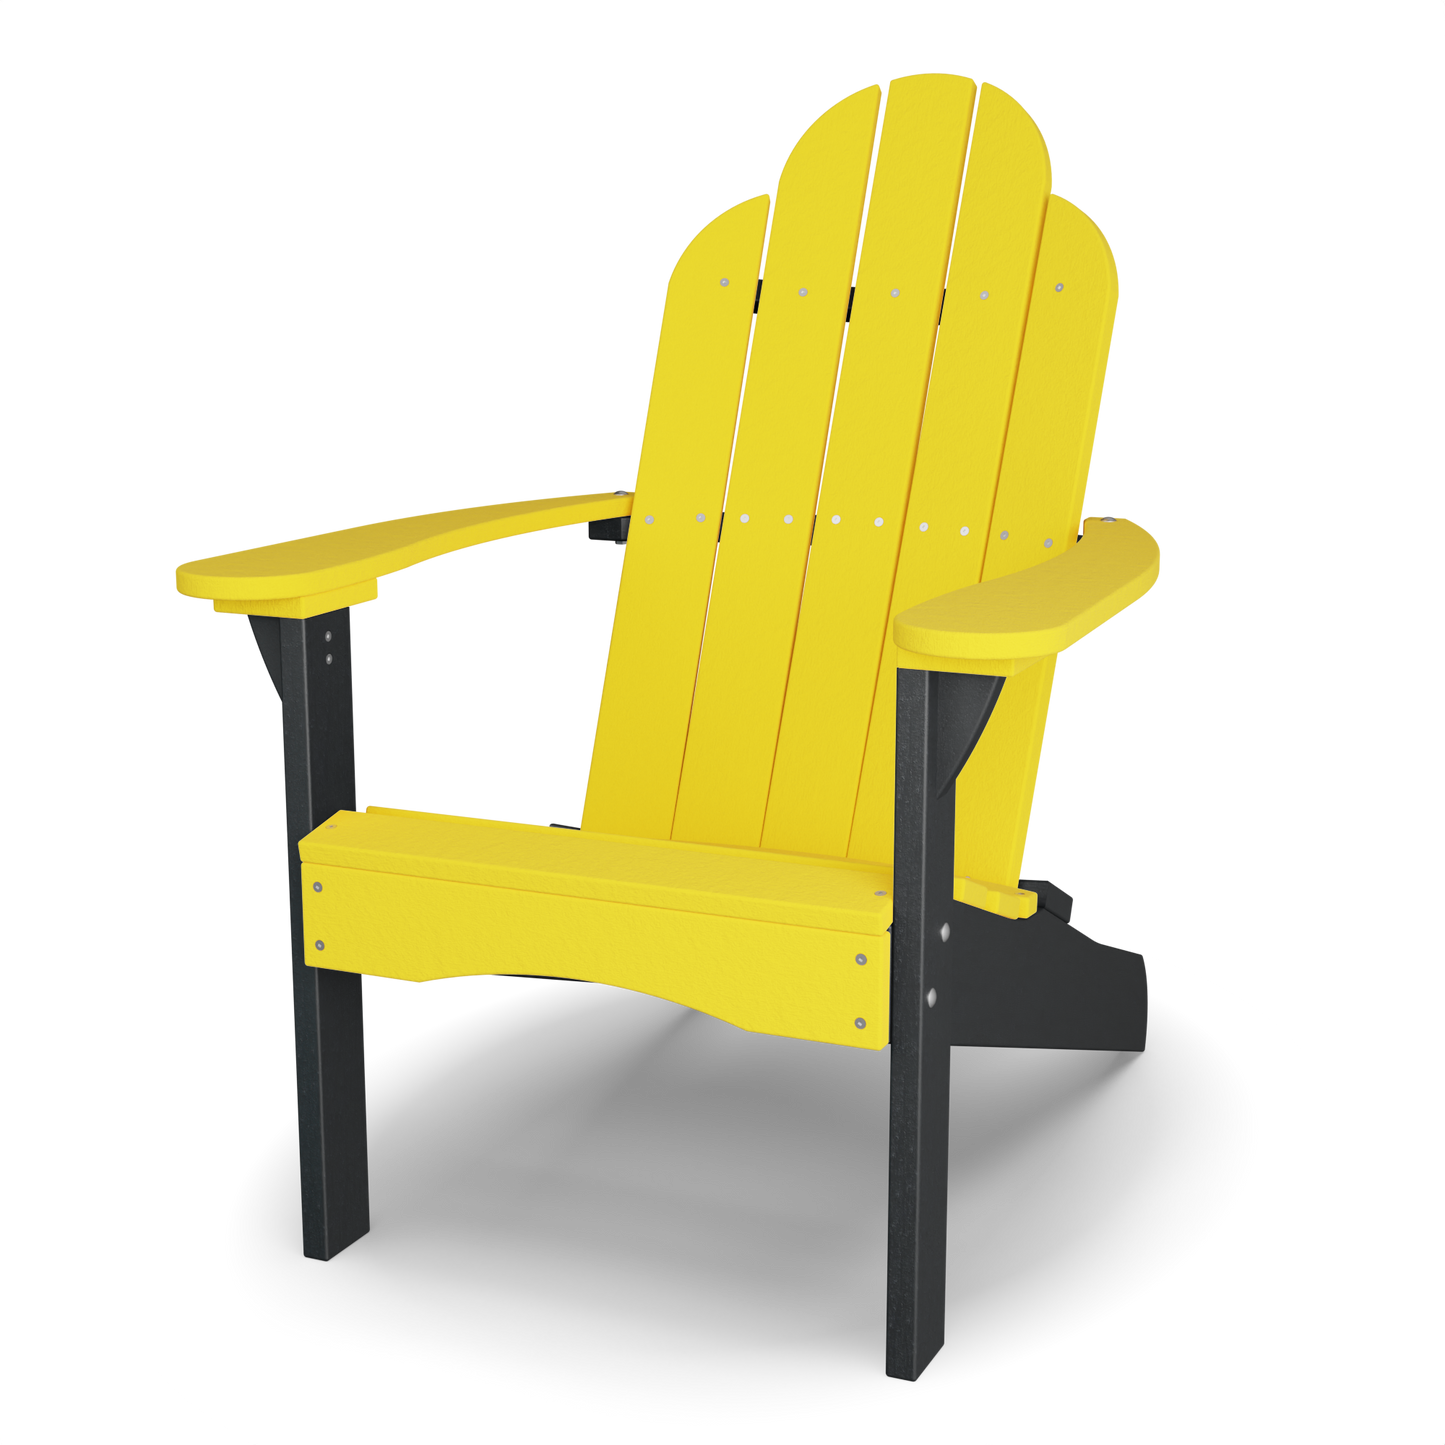 Wildridge Outdoor Recycled Plastic Classic Adirondack Chair - LEAD TIME TO SHIP 6 WEEKS OR LESS